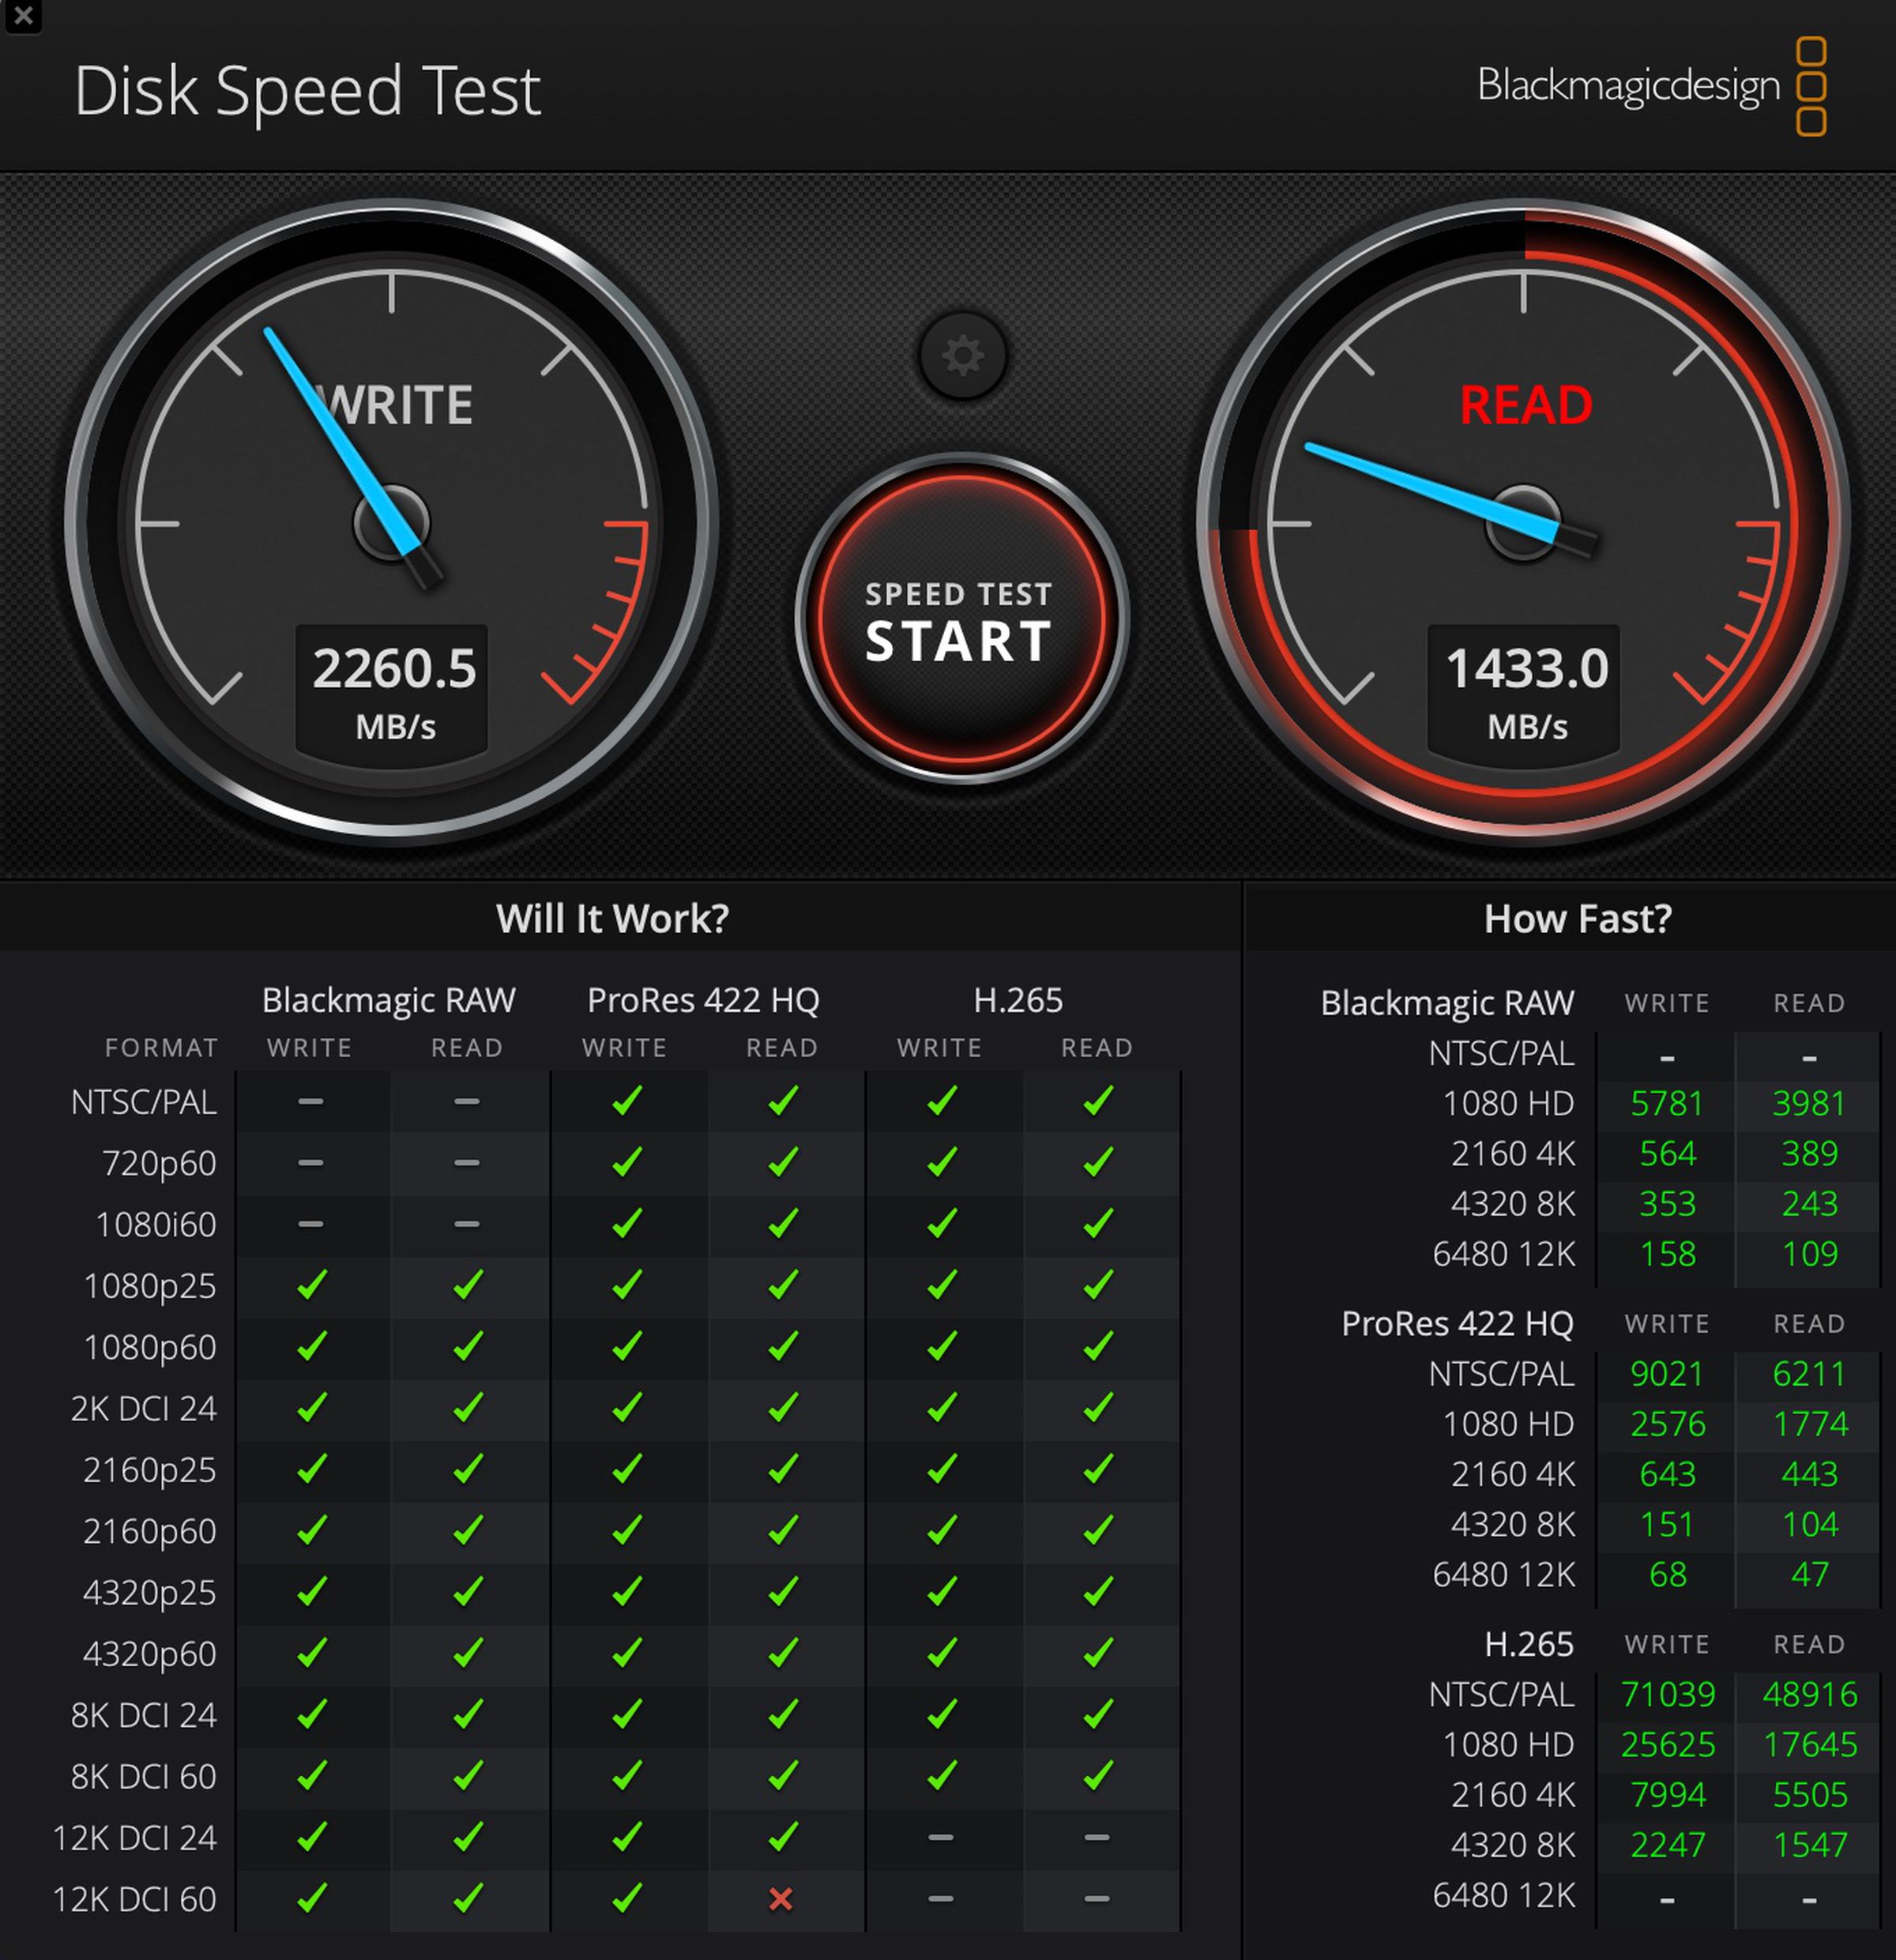 A screenshot of Blackmagic Disk Speed Test indicating scores of 2260.5 for Write and 1433 for Read.